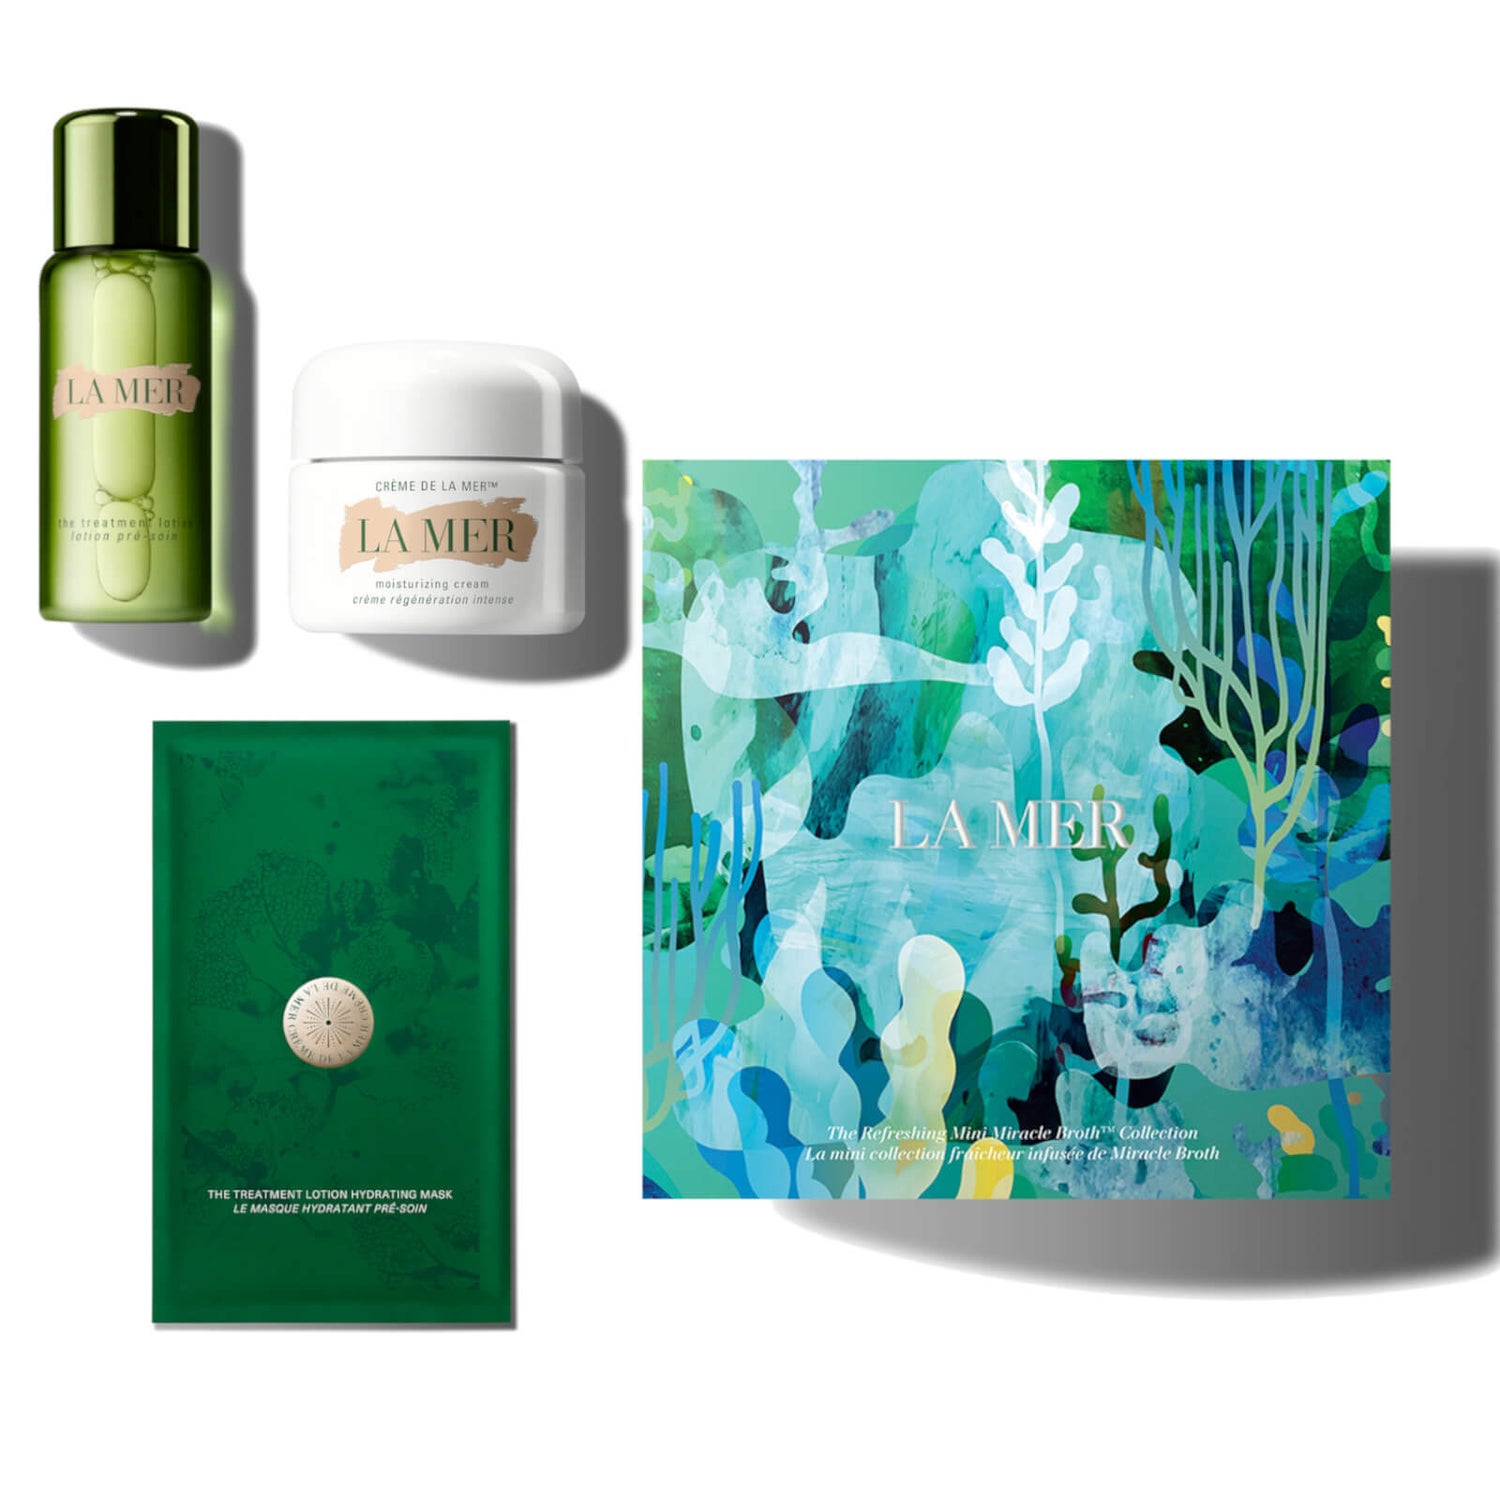 La Mer The Refreshing Mini Miracle Broth Collection